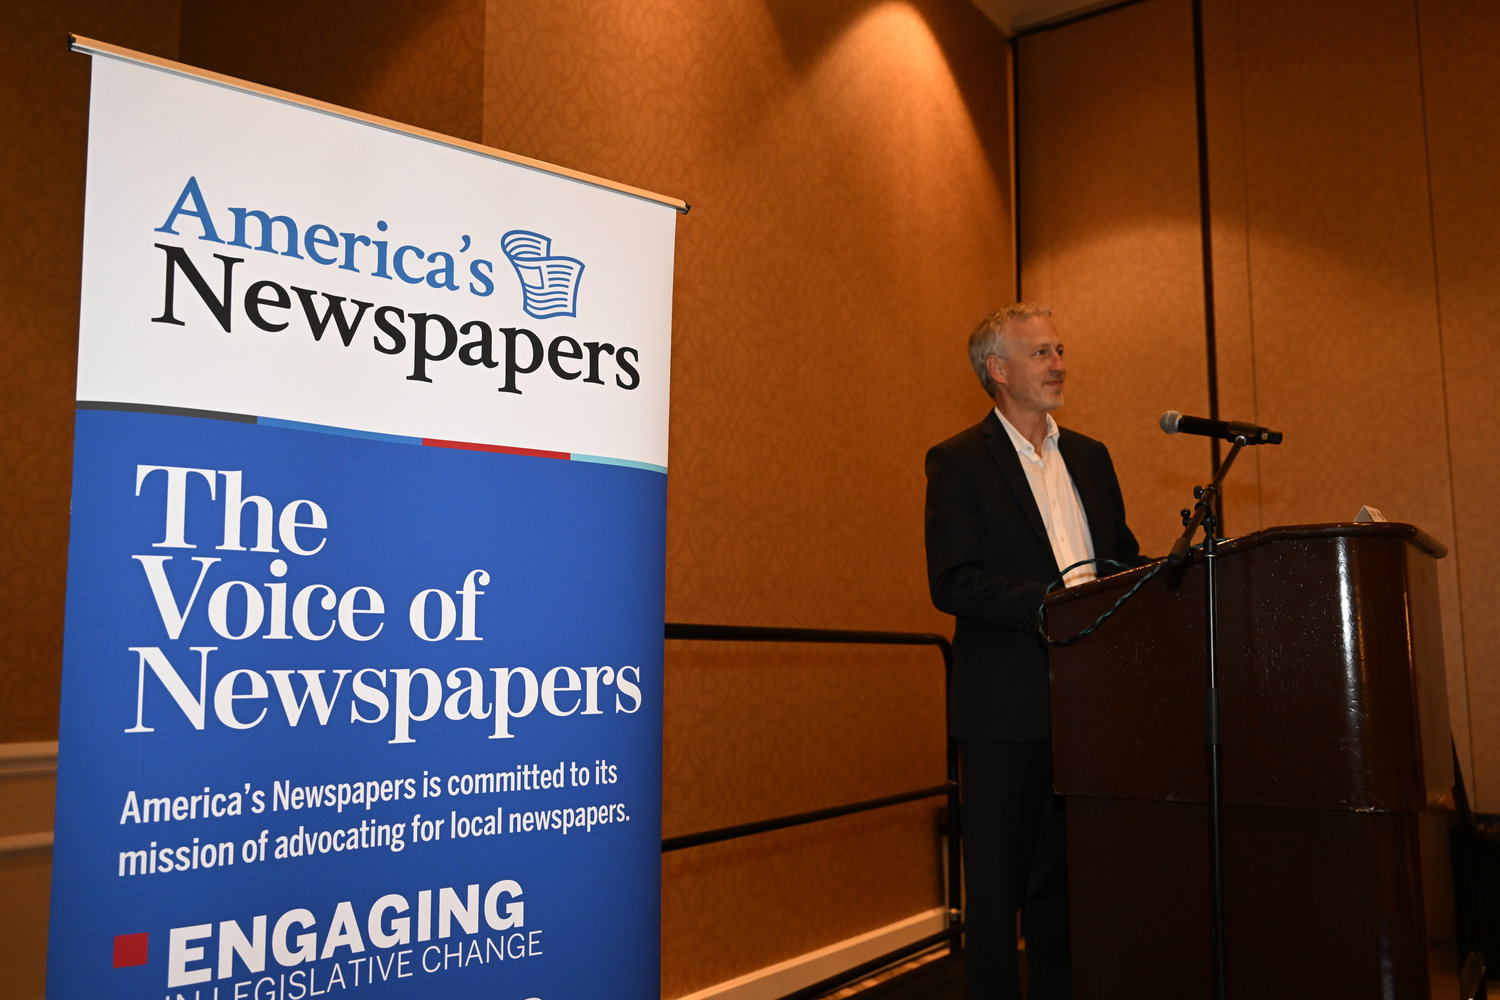 Dean Ridings, CEO of America's Newspapers, introduces the first Solutions Showcase.  Showcases were presented during the Senior Leadership Conference by TownNews, Legacy.com, Easy Tax Credits, OwnLocal, AdCellerant and Lineup. (Photo by Jeff Strout)